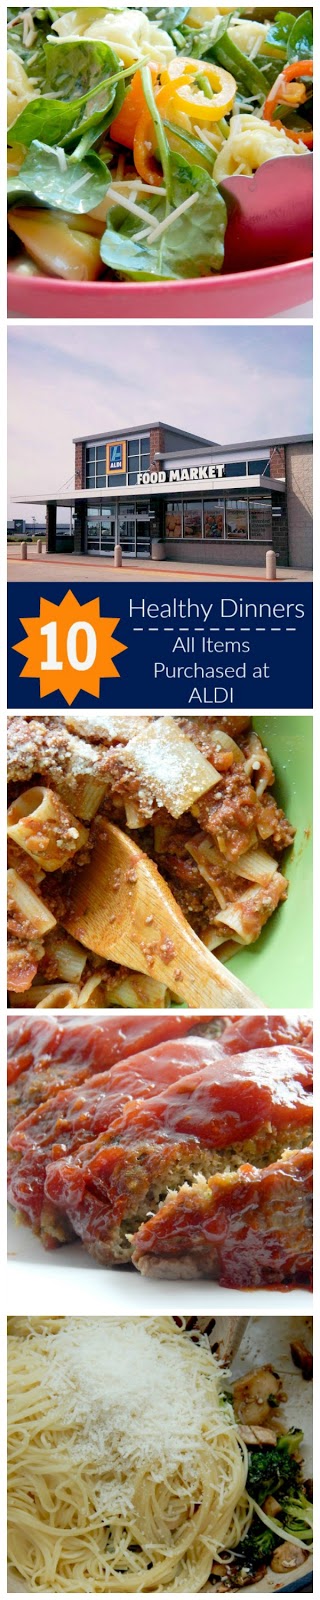 10 Healthy Dinners All Items Purchased at ALDI (sweetandsavoryfood.com)